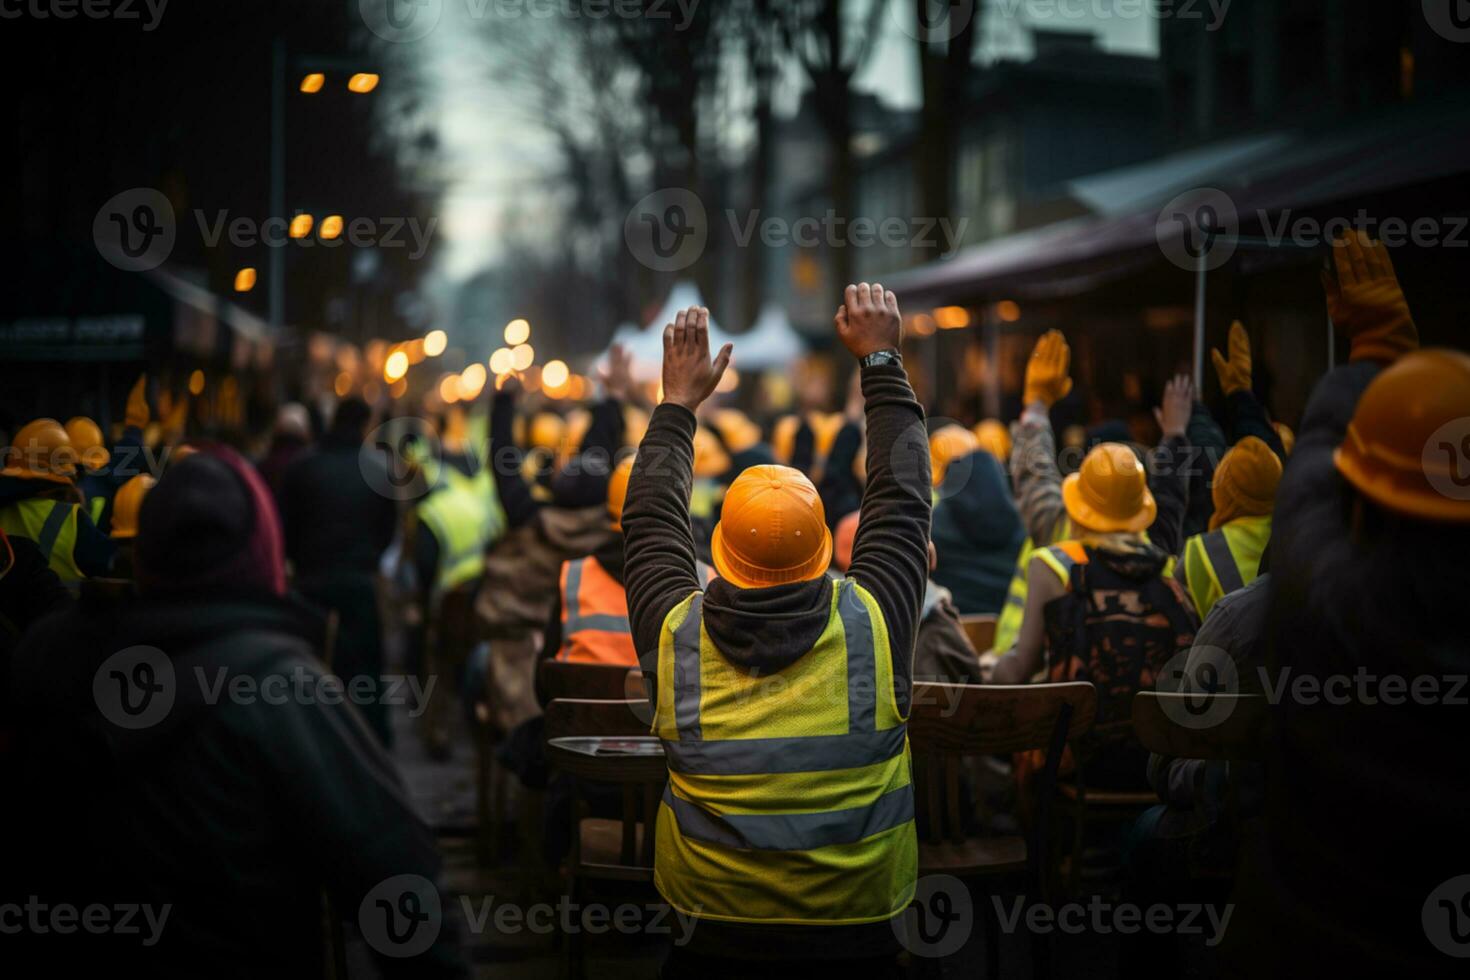 Constructions workers walking on the street celebrating photo